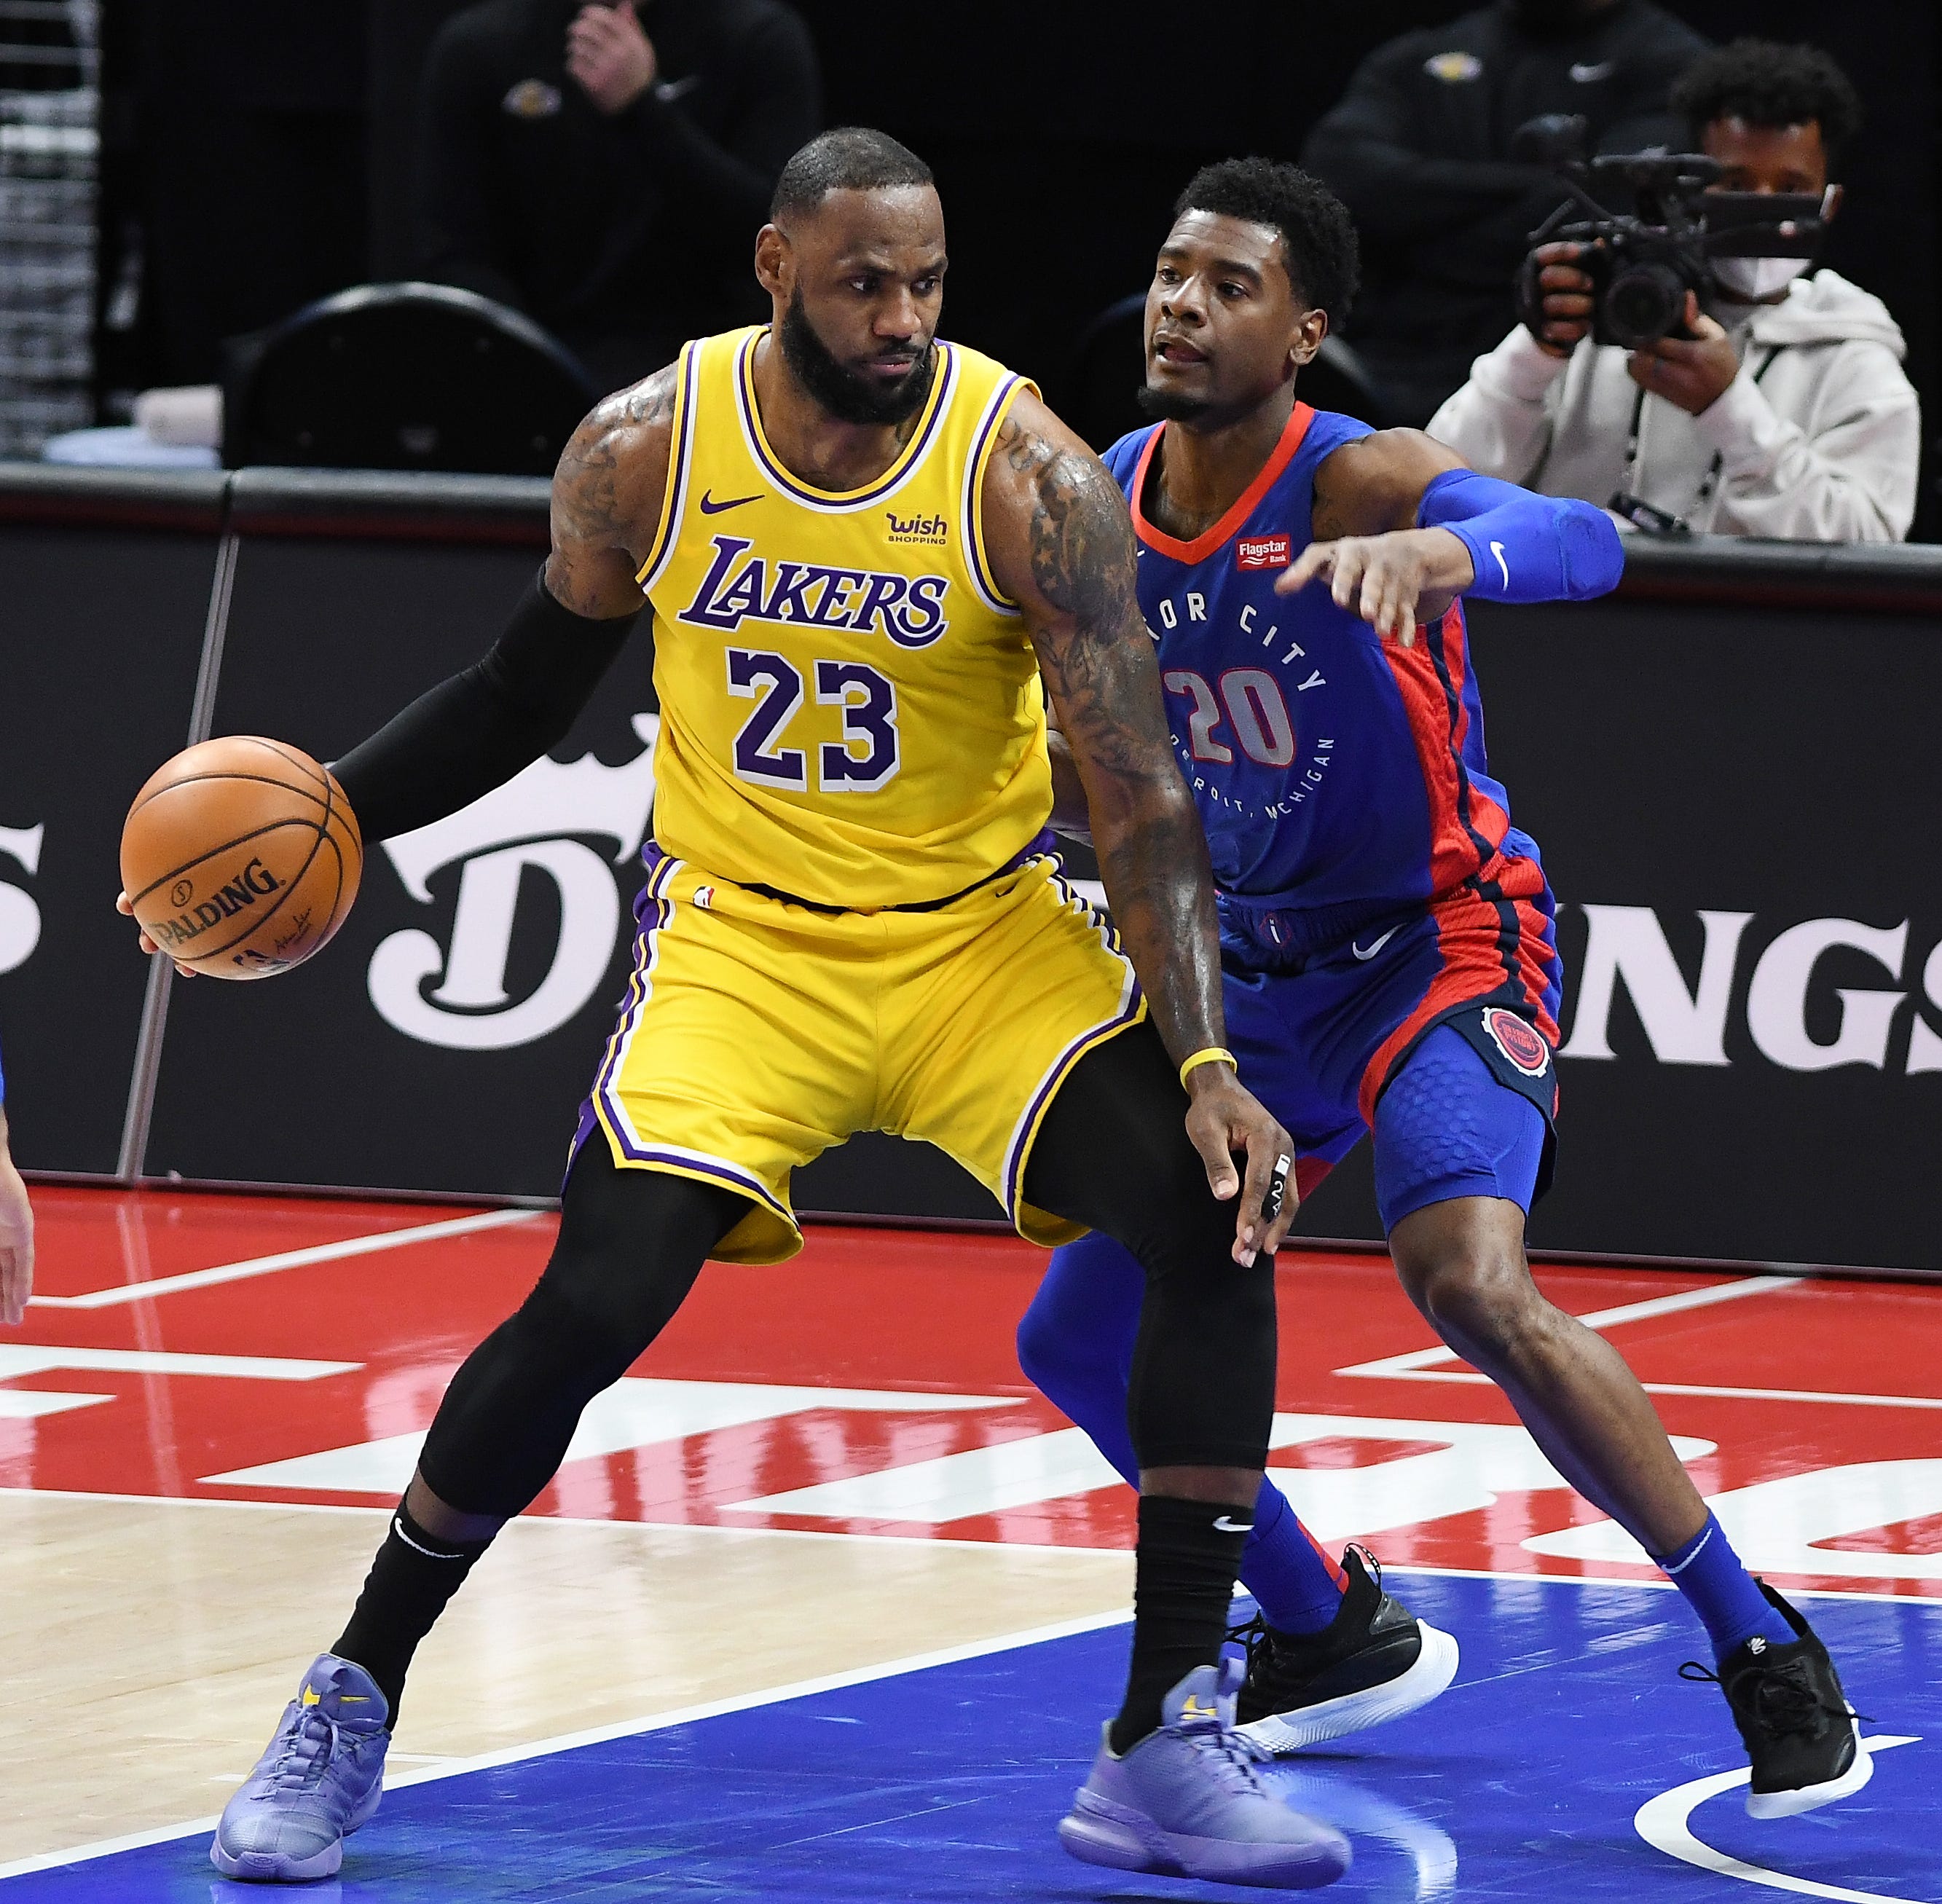 Lakers' LeBron James looks for room around Pistons' Josh Jackson in the second quarter.